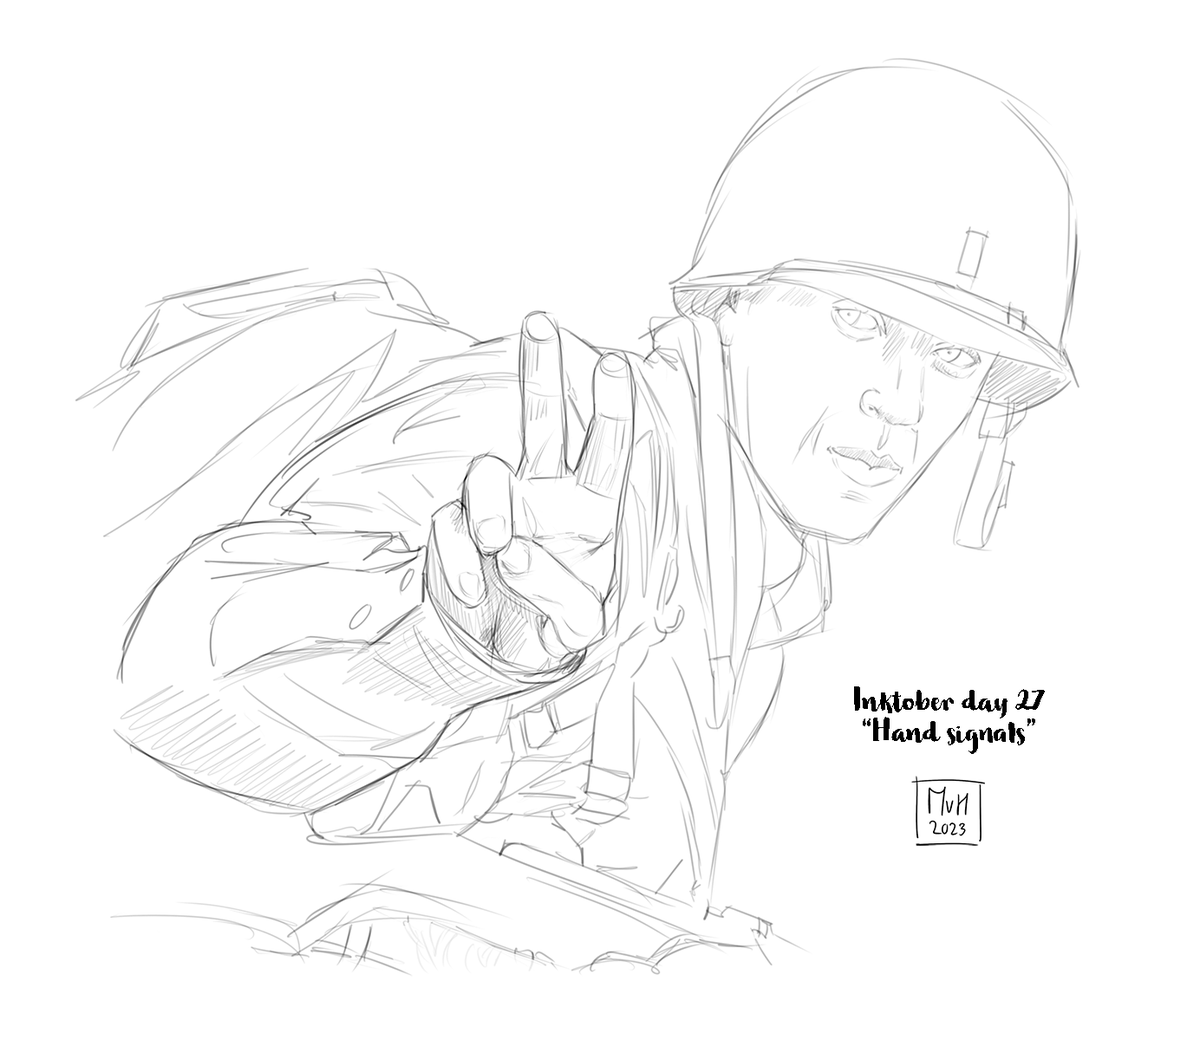 BoB Inktober day 27. Hand signals. My one mistake in this whole Inktober challenge was to take a break. Now I'm just running to catch up. But I do love this sketch of Winters and one of the many times he signals his men. #inktober #inktober2023